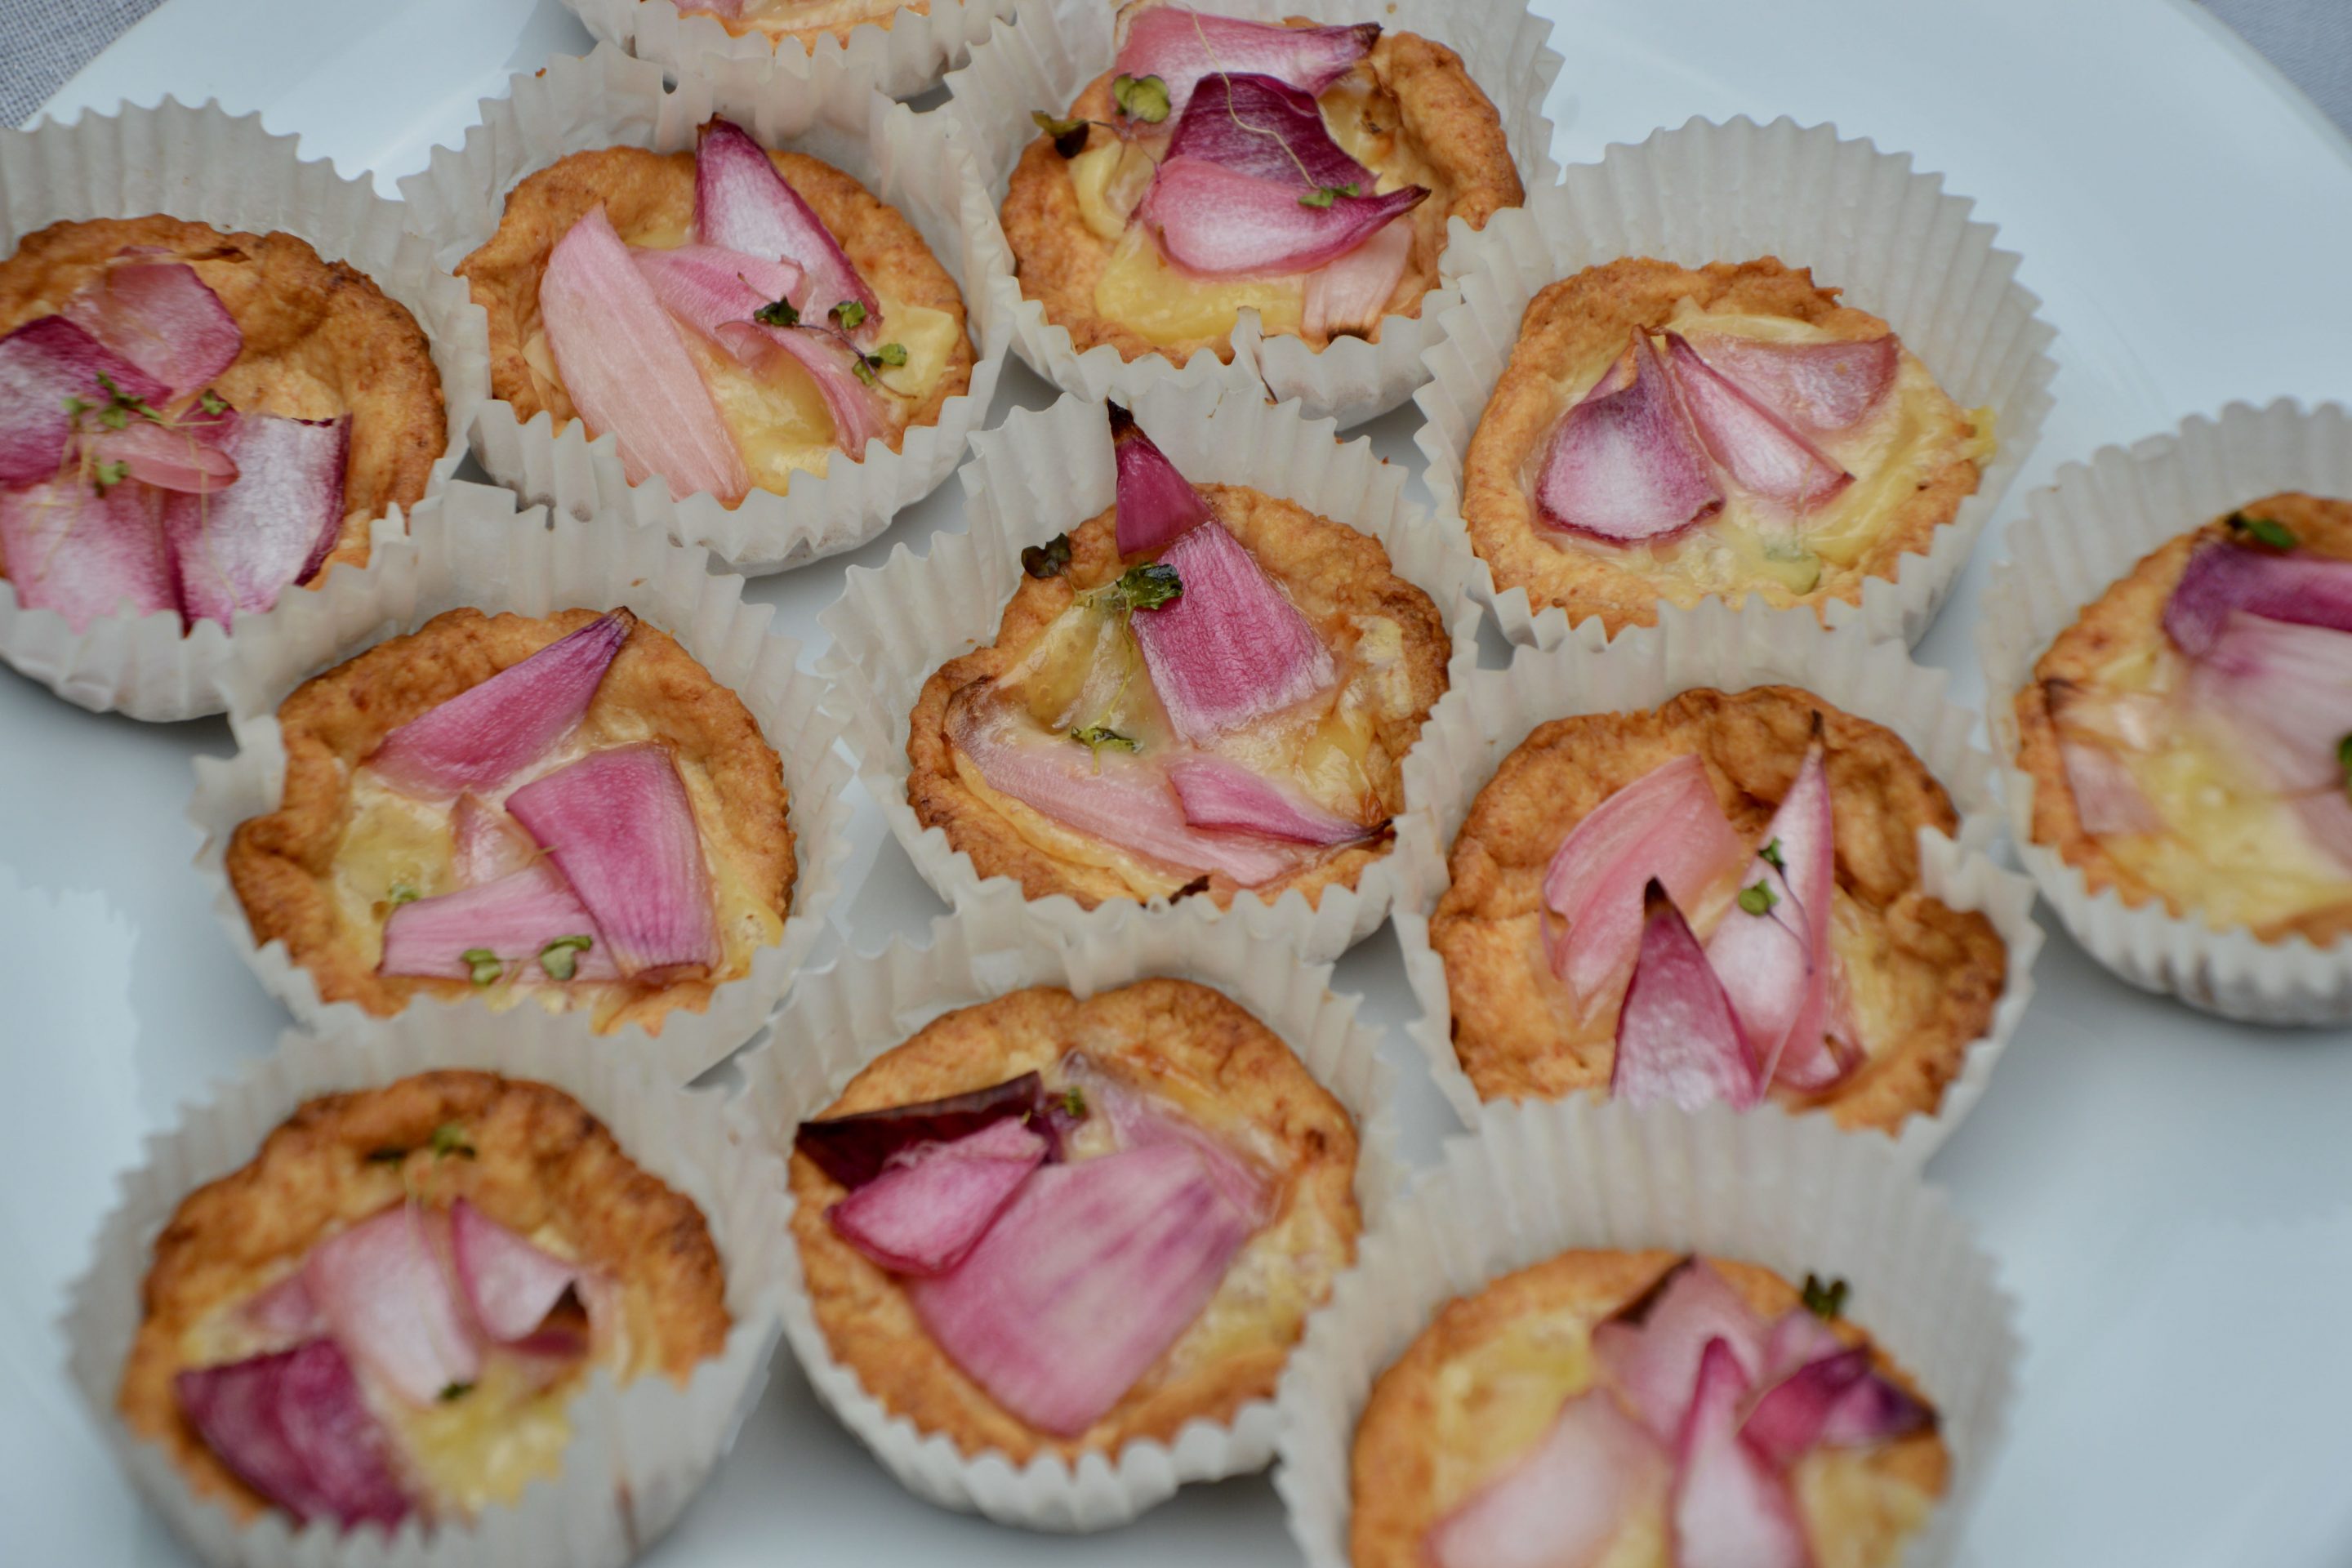 Parmesan tartlets with red onion & comté cheese